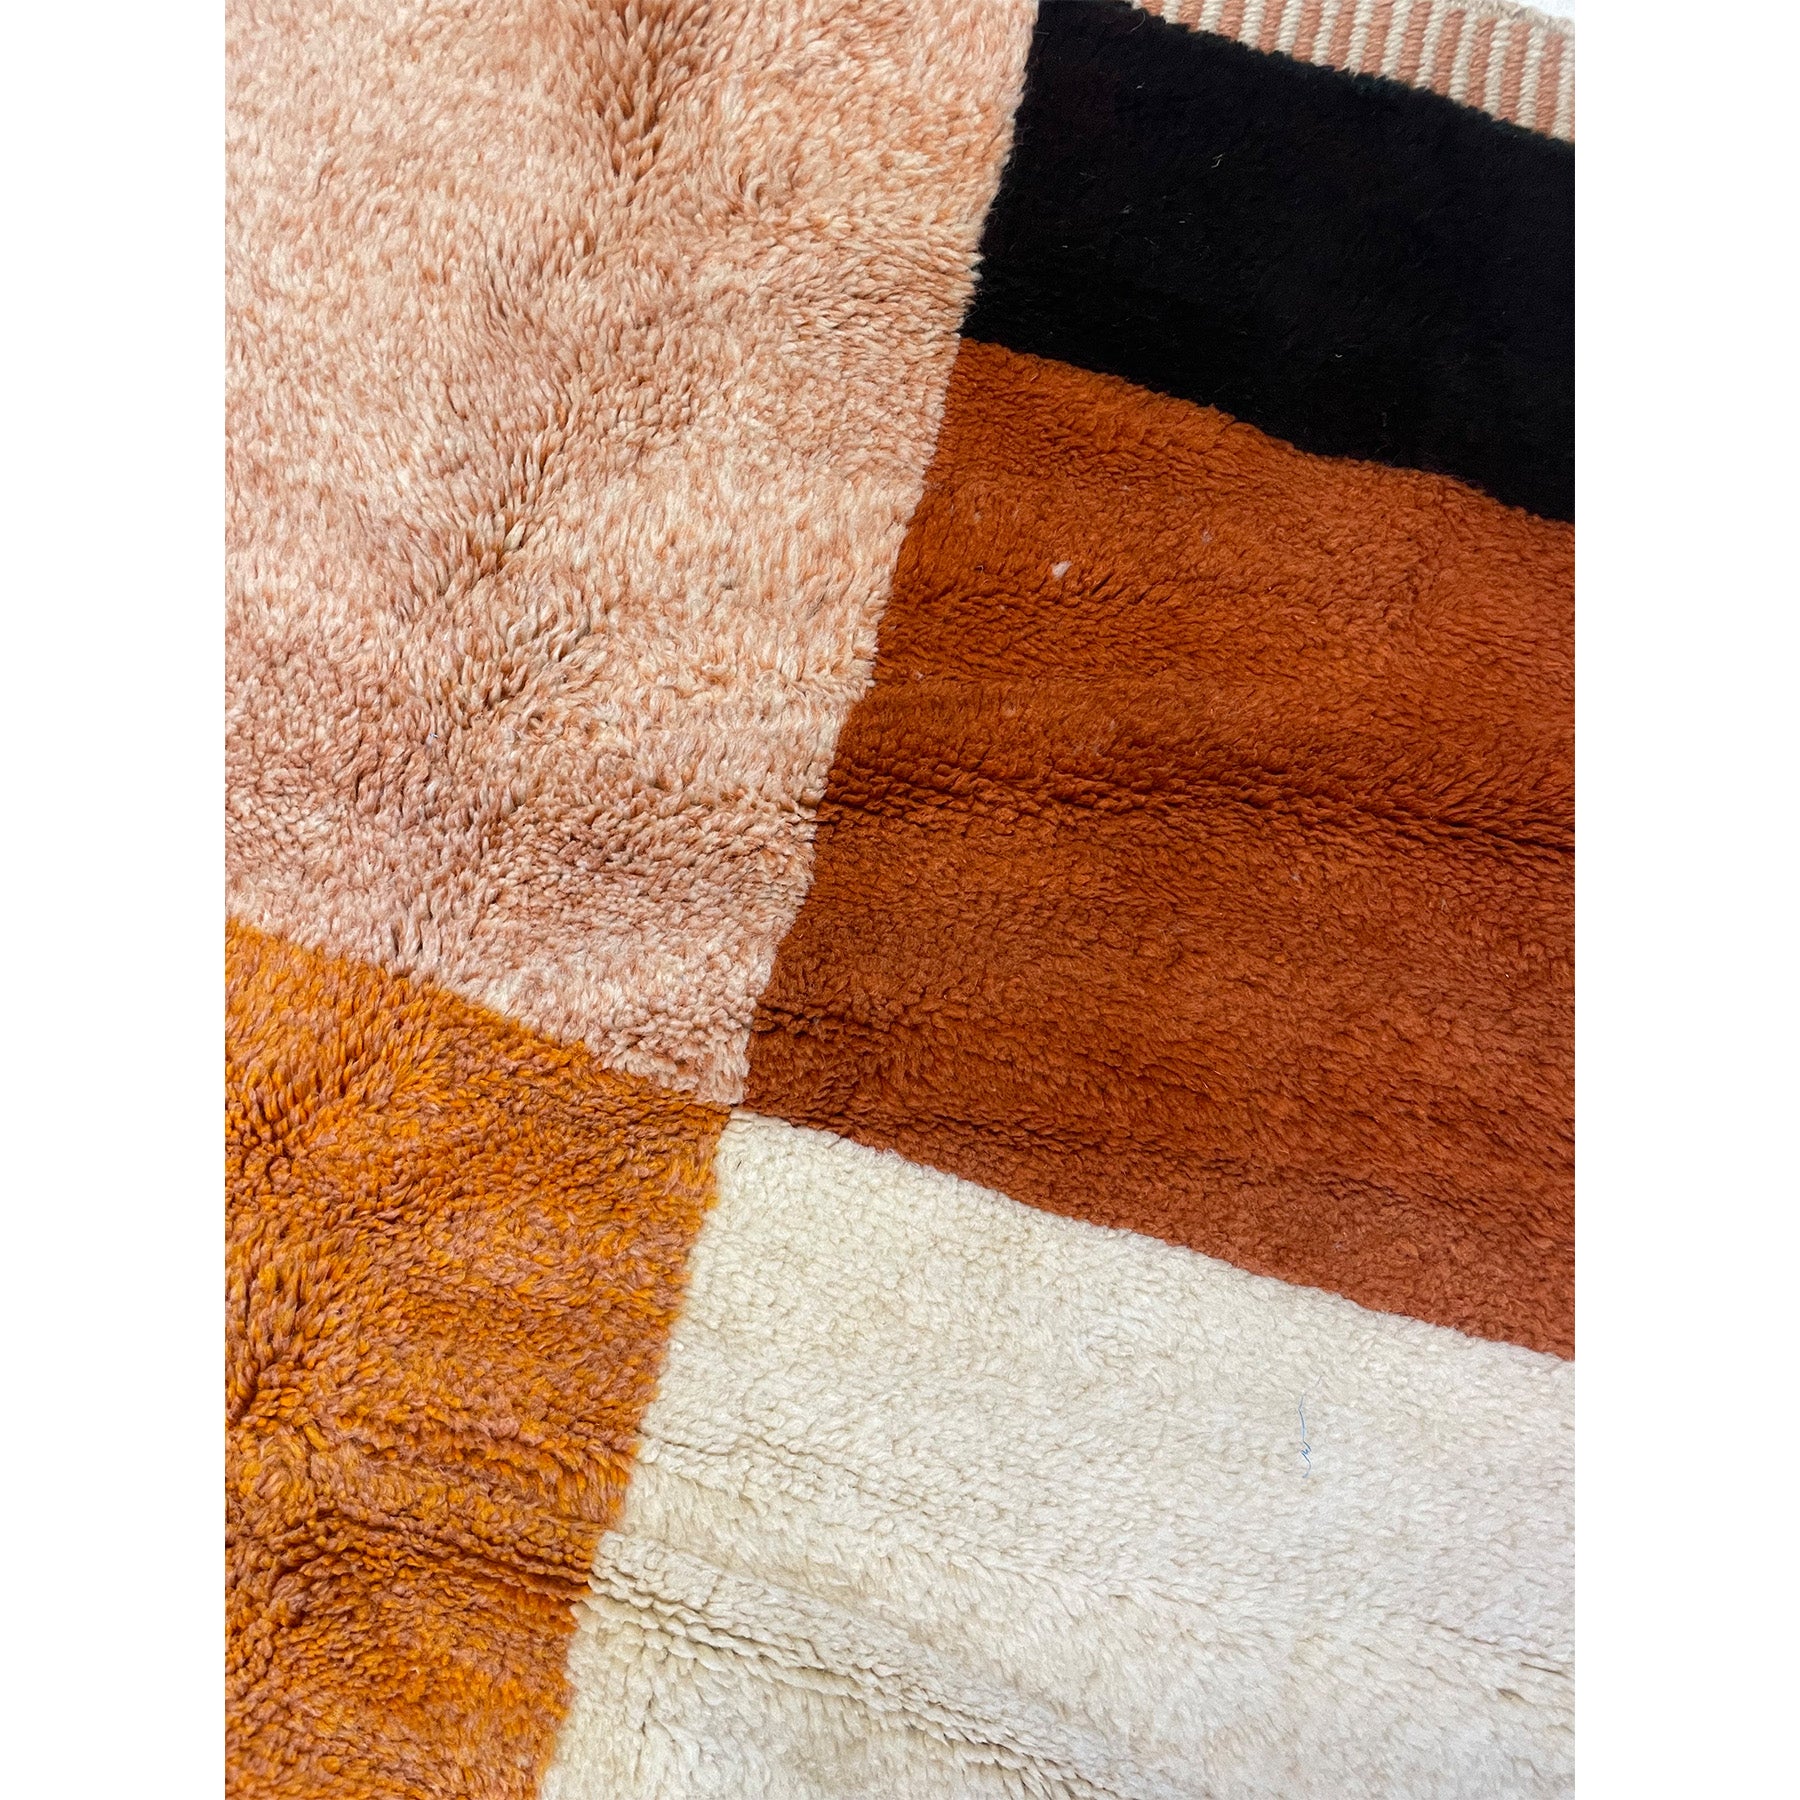 One-of-a-kind Moroccan rug in shades of orange, white, and black - Kantara | Moroccan Rugs